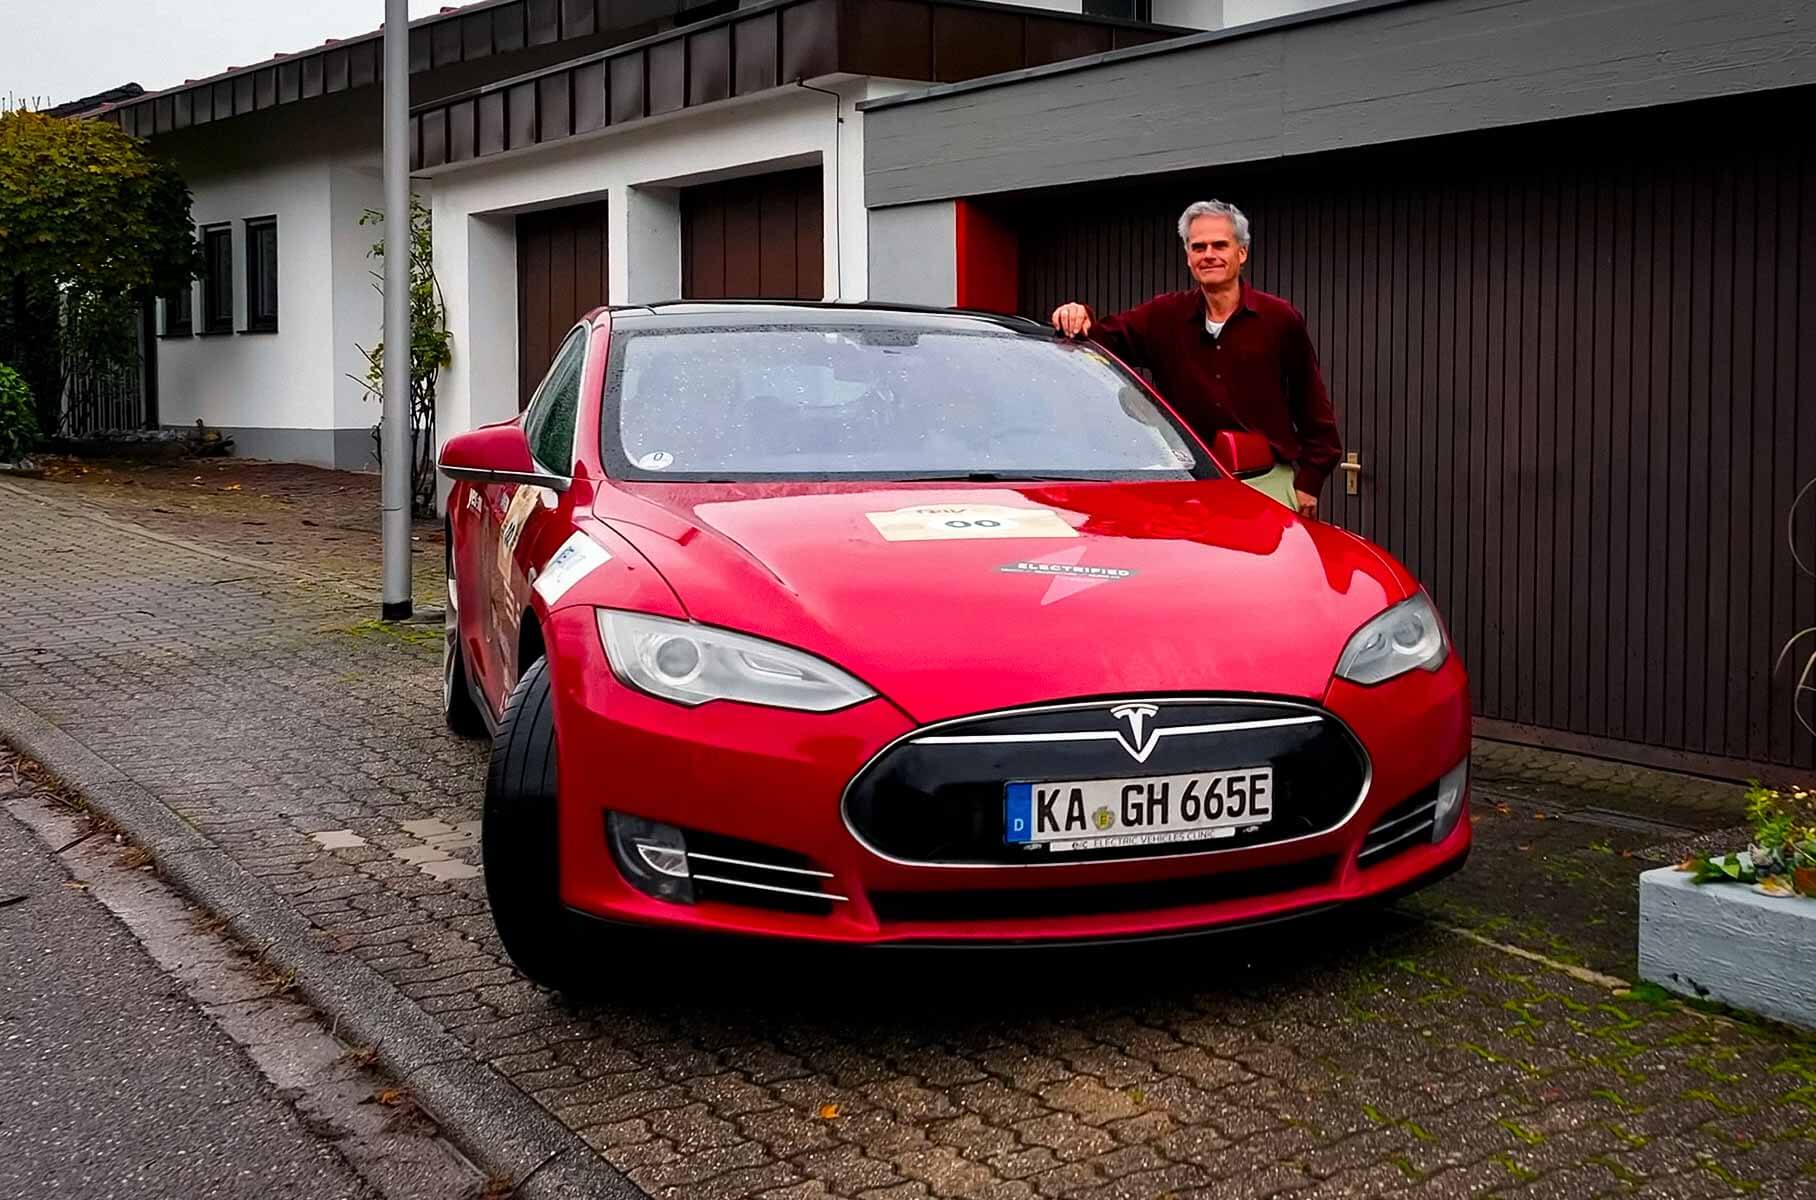 A resident of Germany drove a Tesla Model S two million kilometers